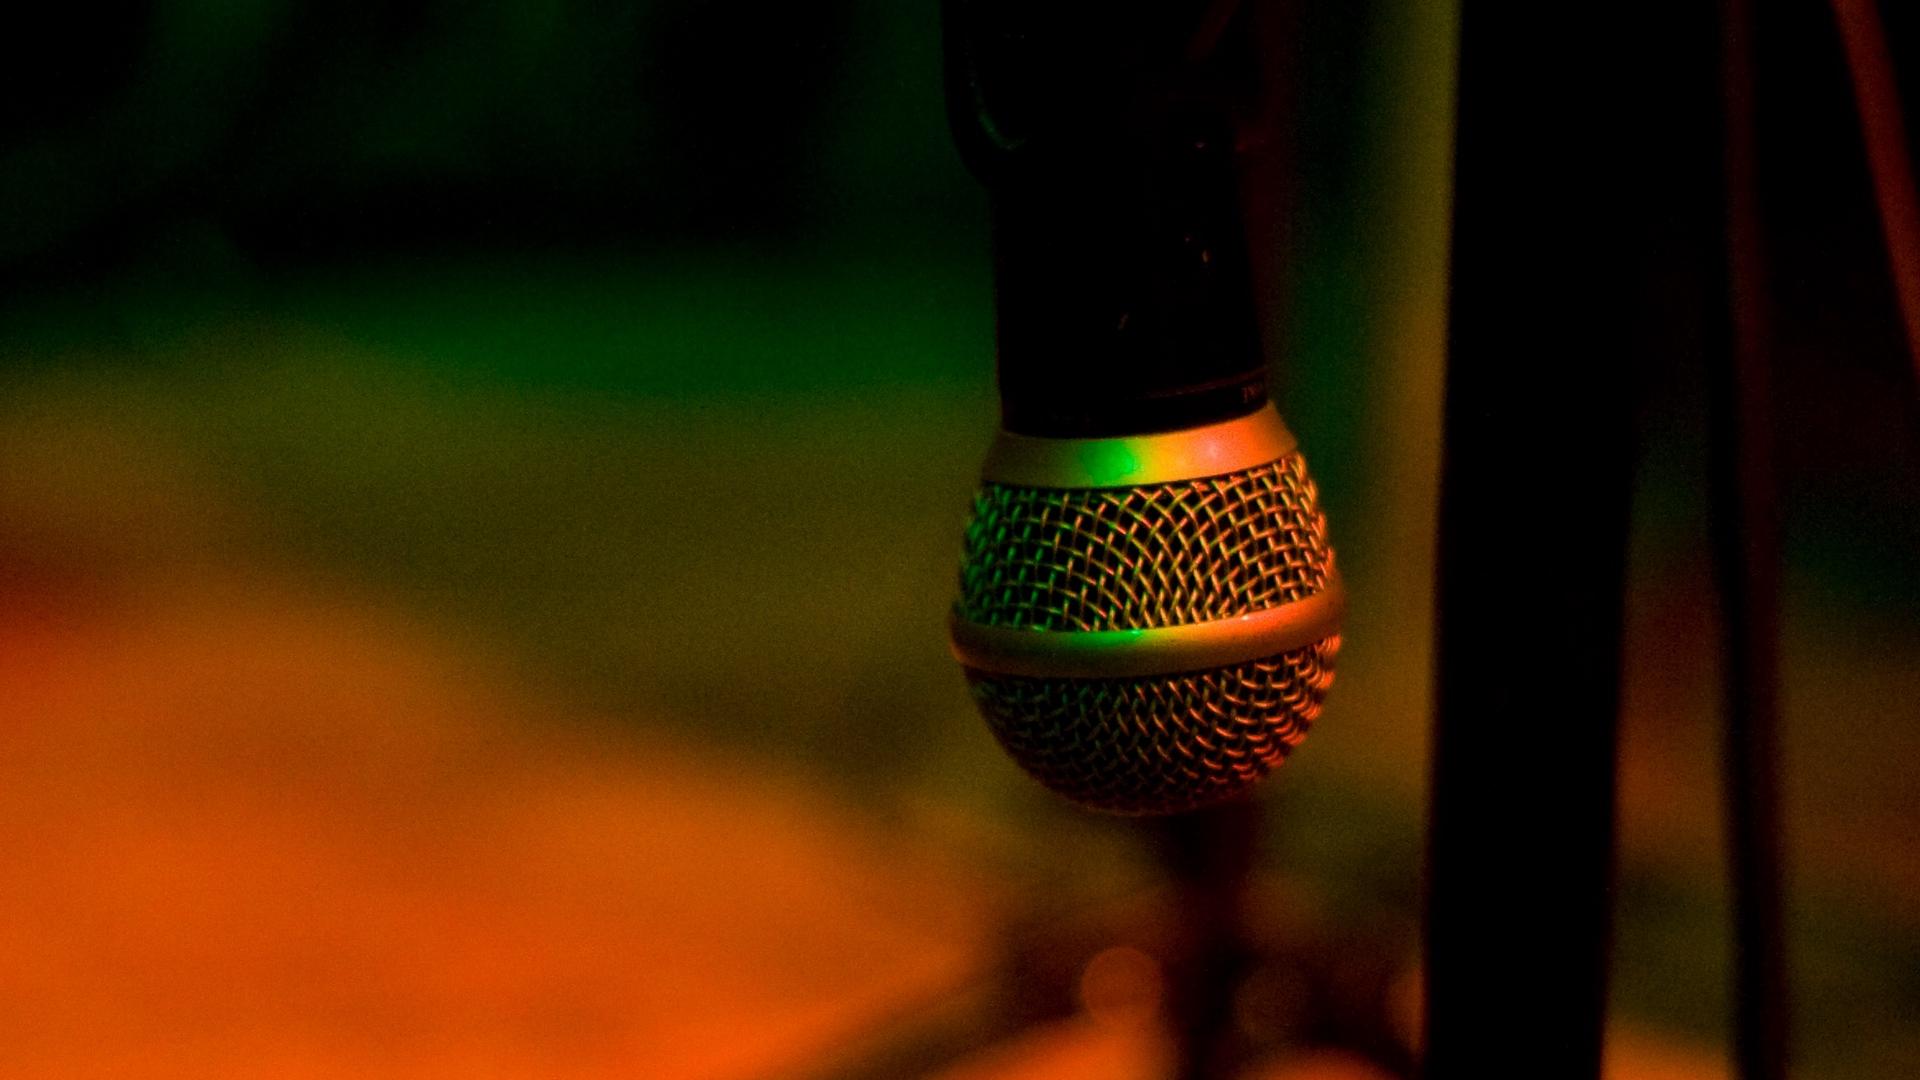 Download wallpaper 1920x1080 microphone, music, stage, stand